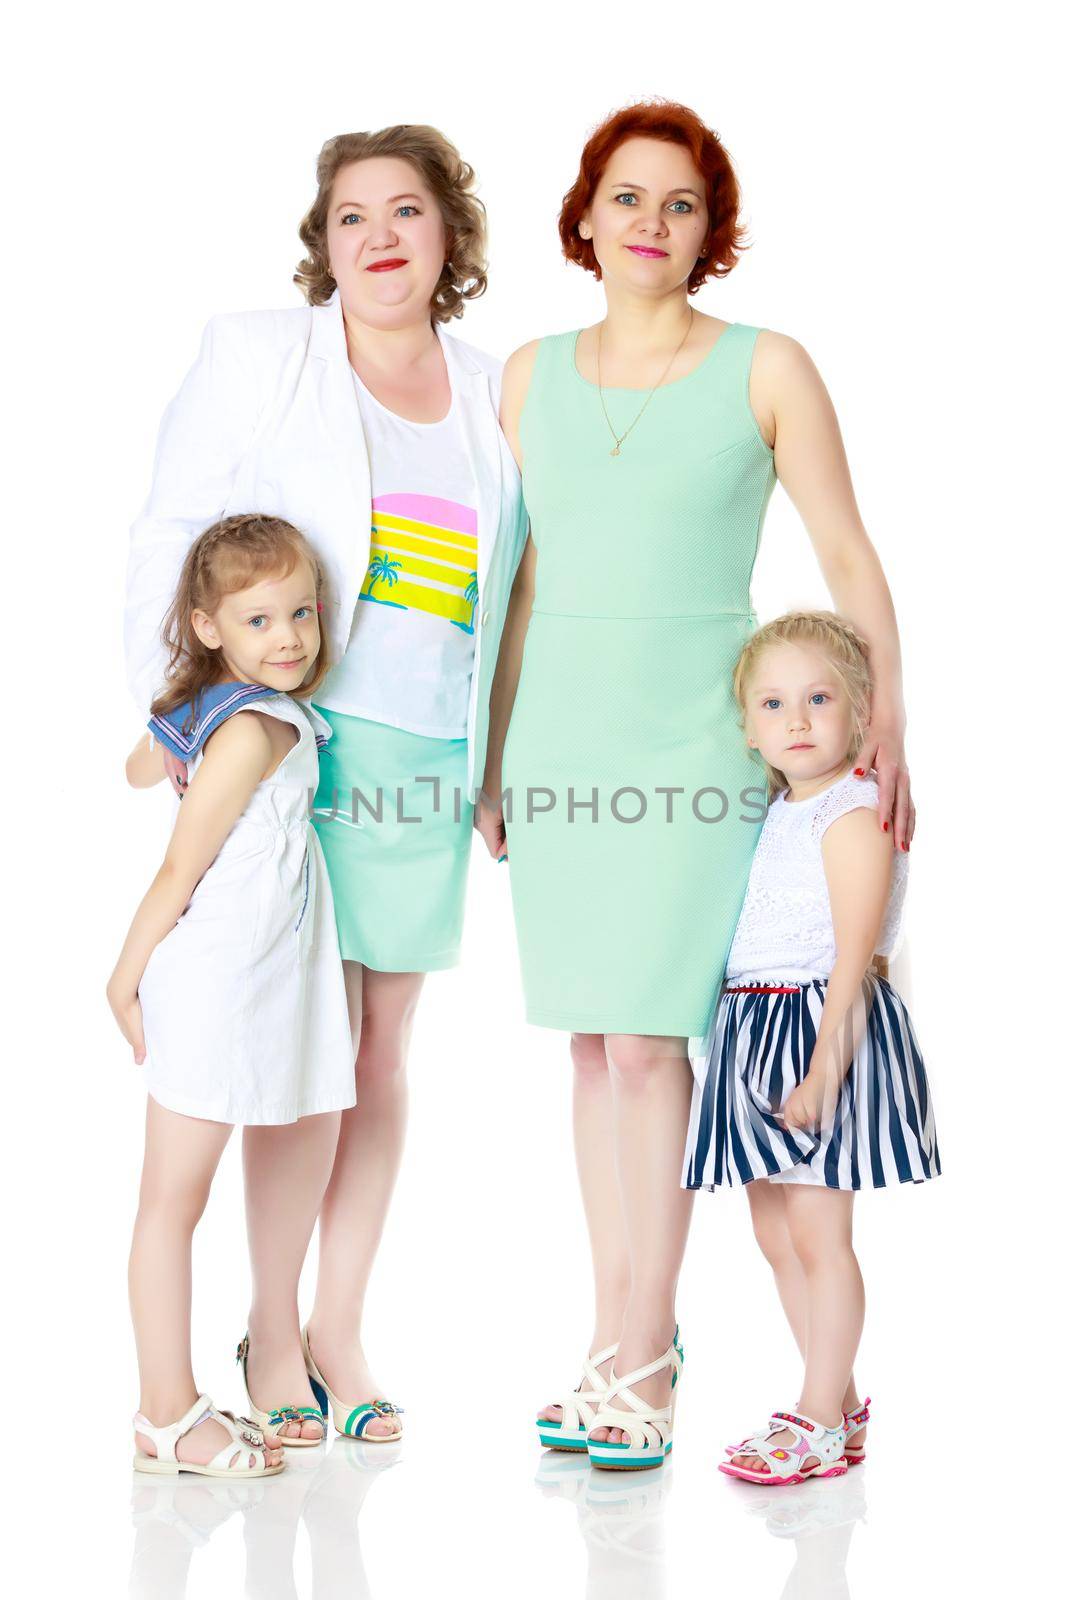 Happy family with young children. The concept of family happiness and development of children. Isolated on white background.